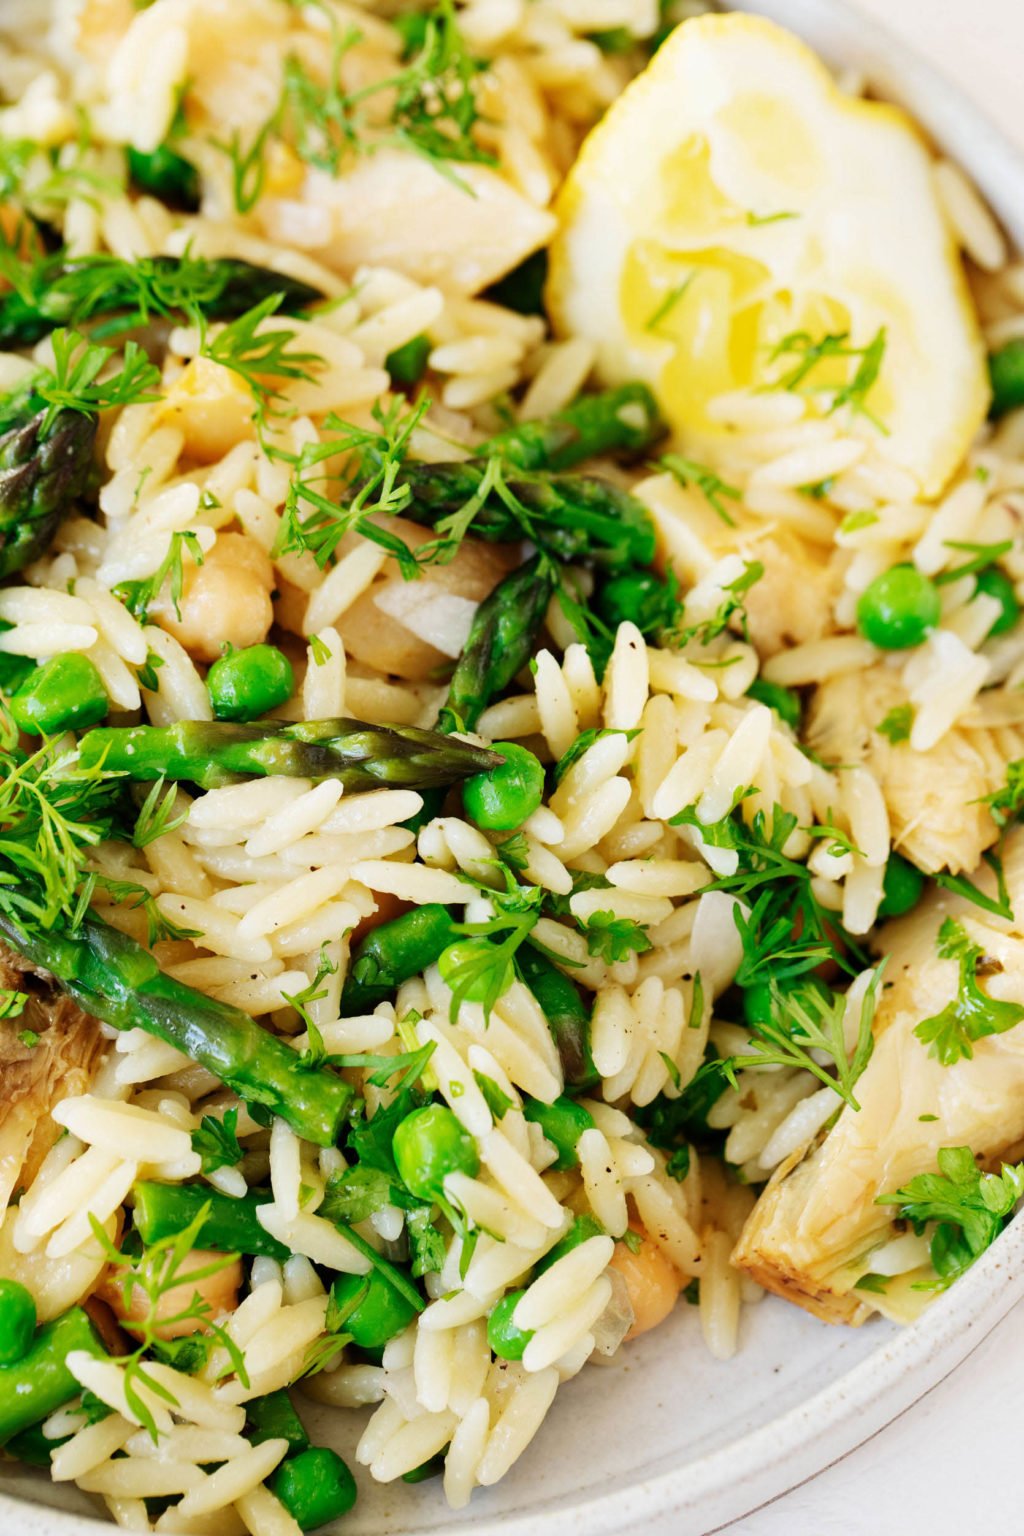 A close up photograph of orzo pasta salad, which has been dressed with olive oil and lemon and packed with fresh herbs.